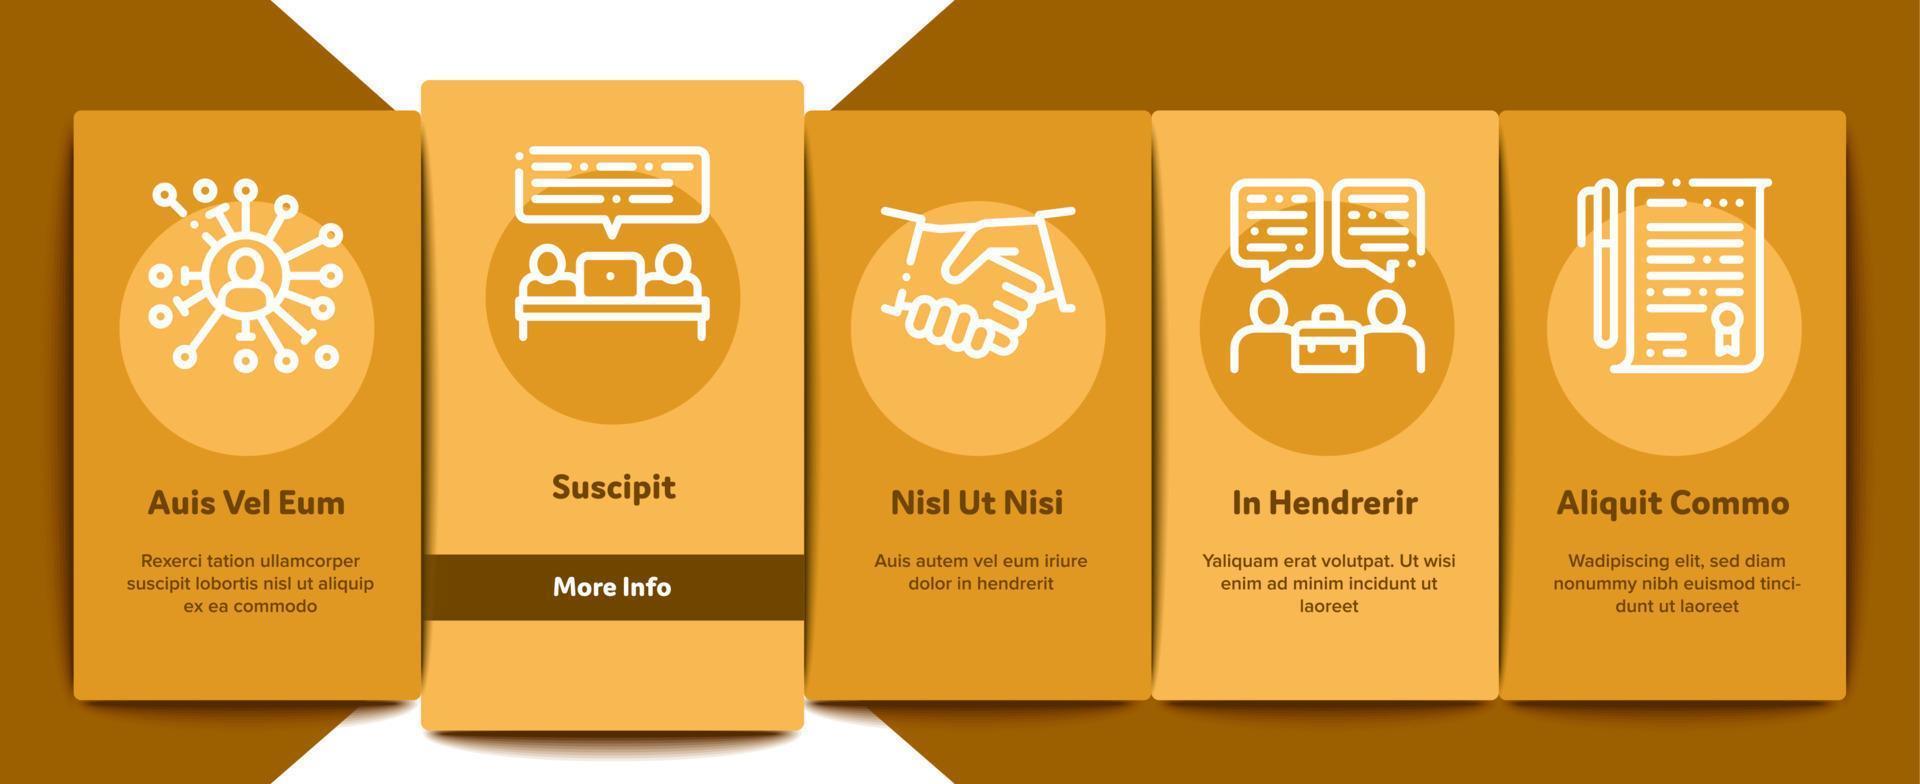 Contract Onboarding Elements Icons Set Vector